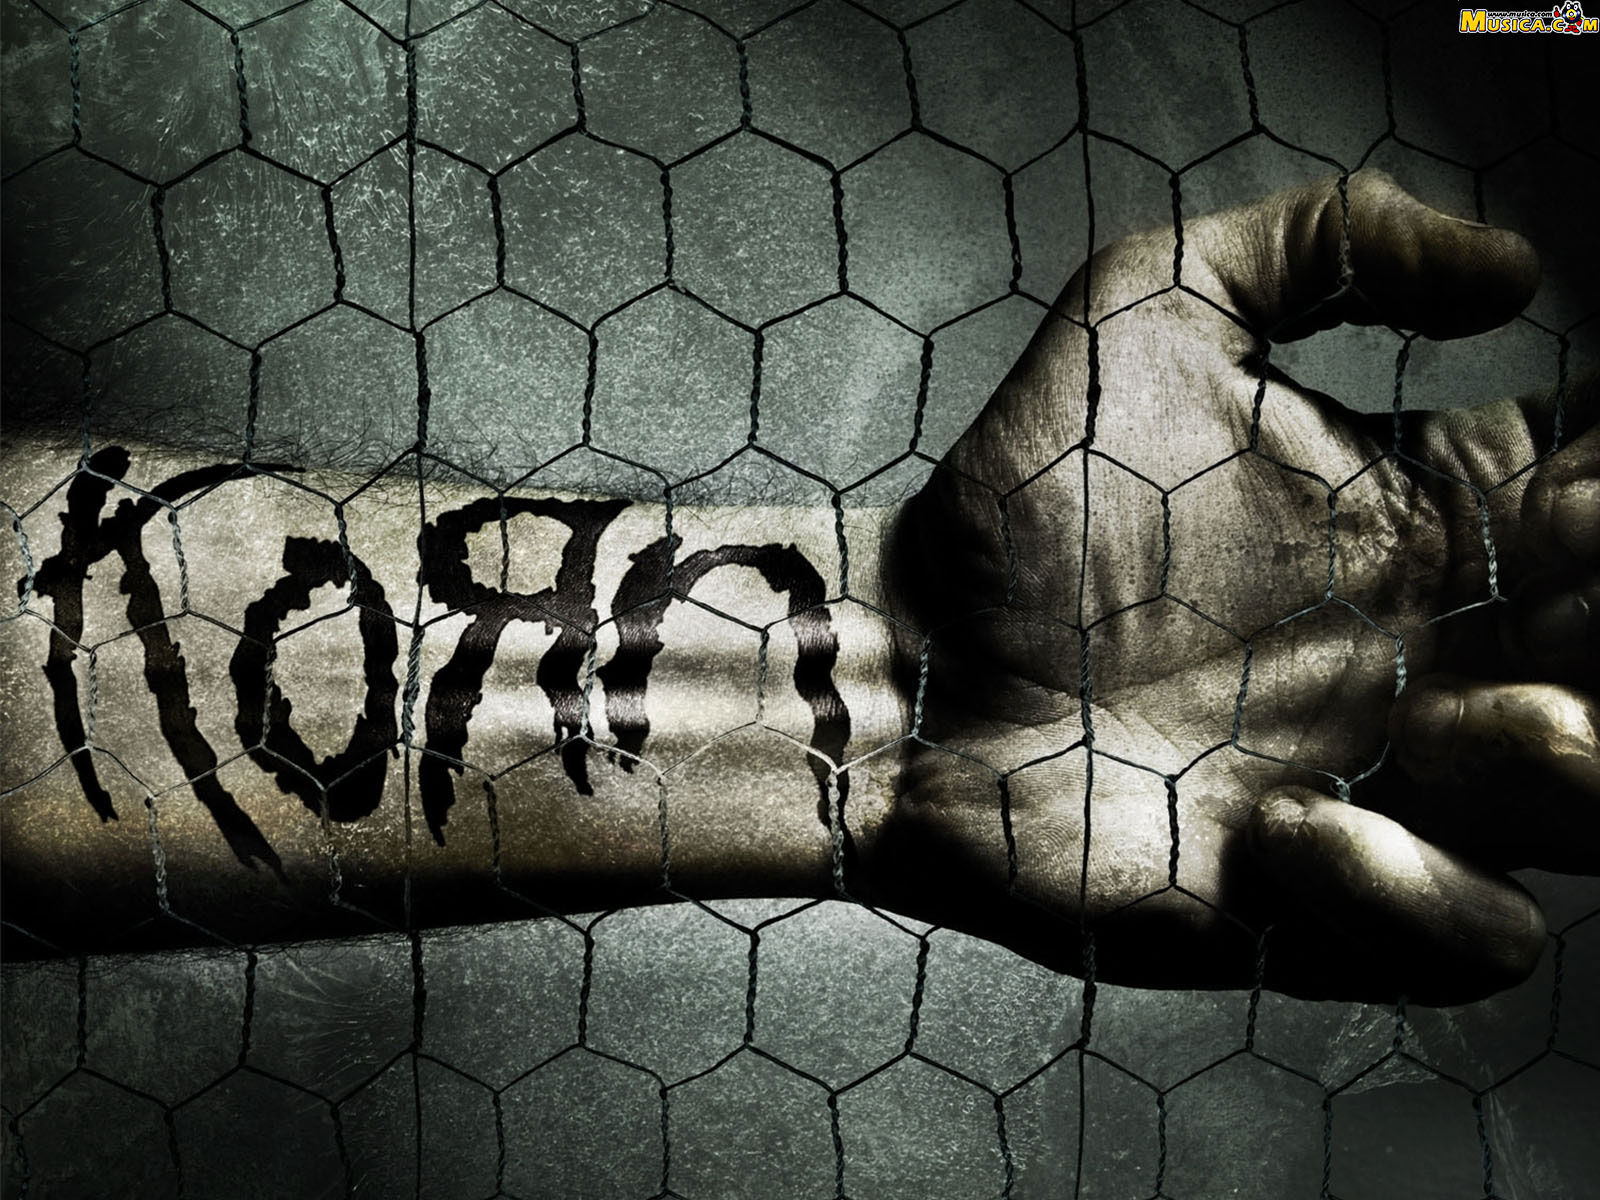 Image Korn Wallpaper Pc Android iPhone And iPad